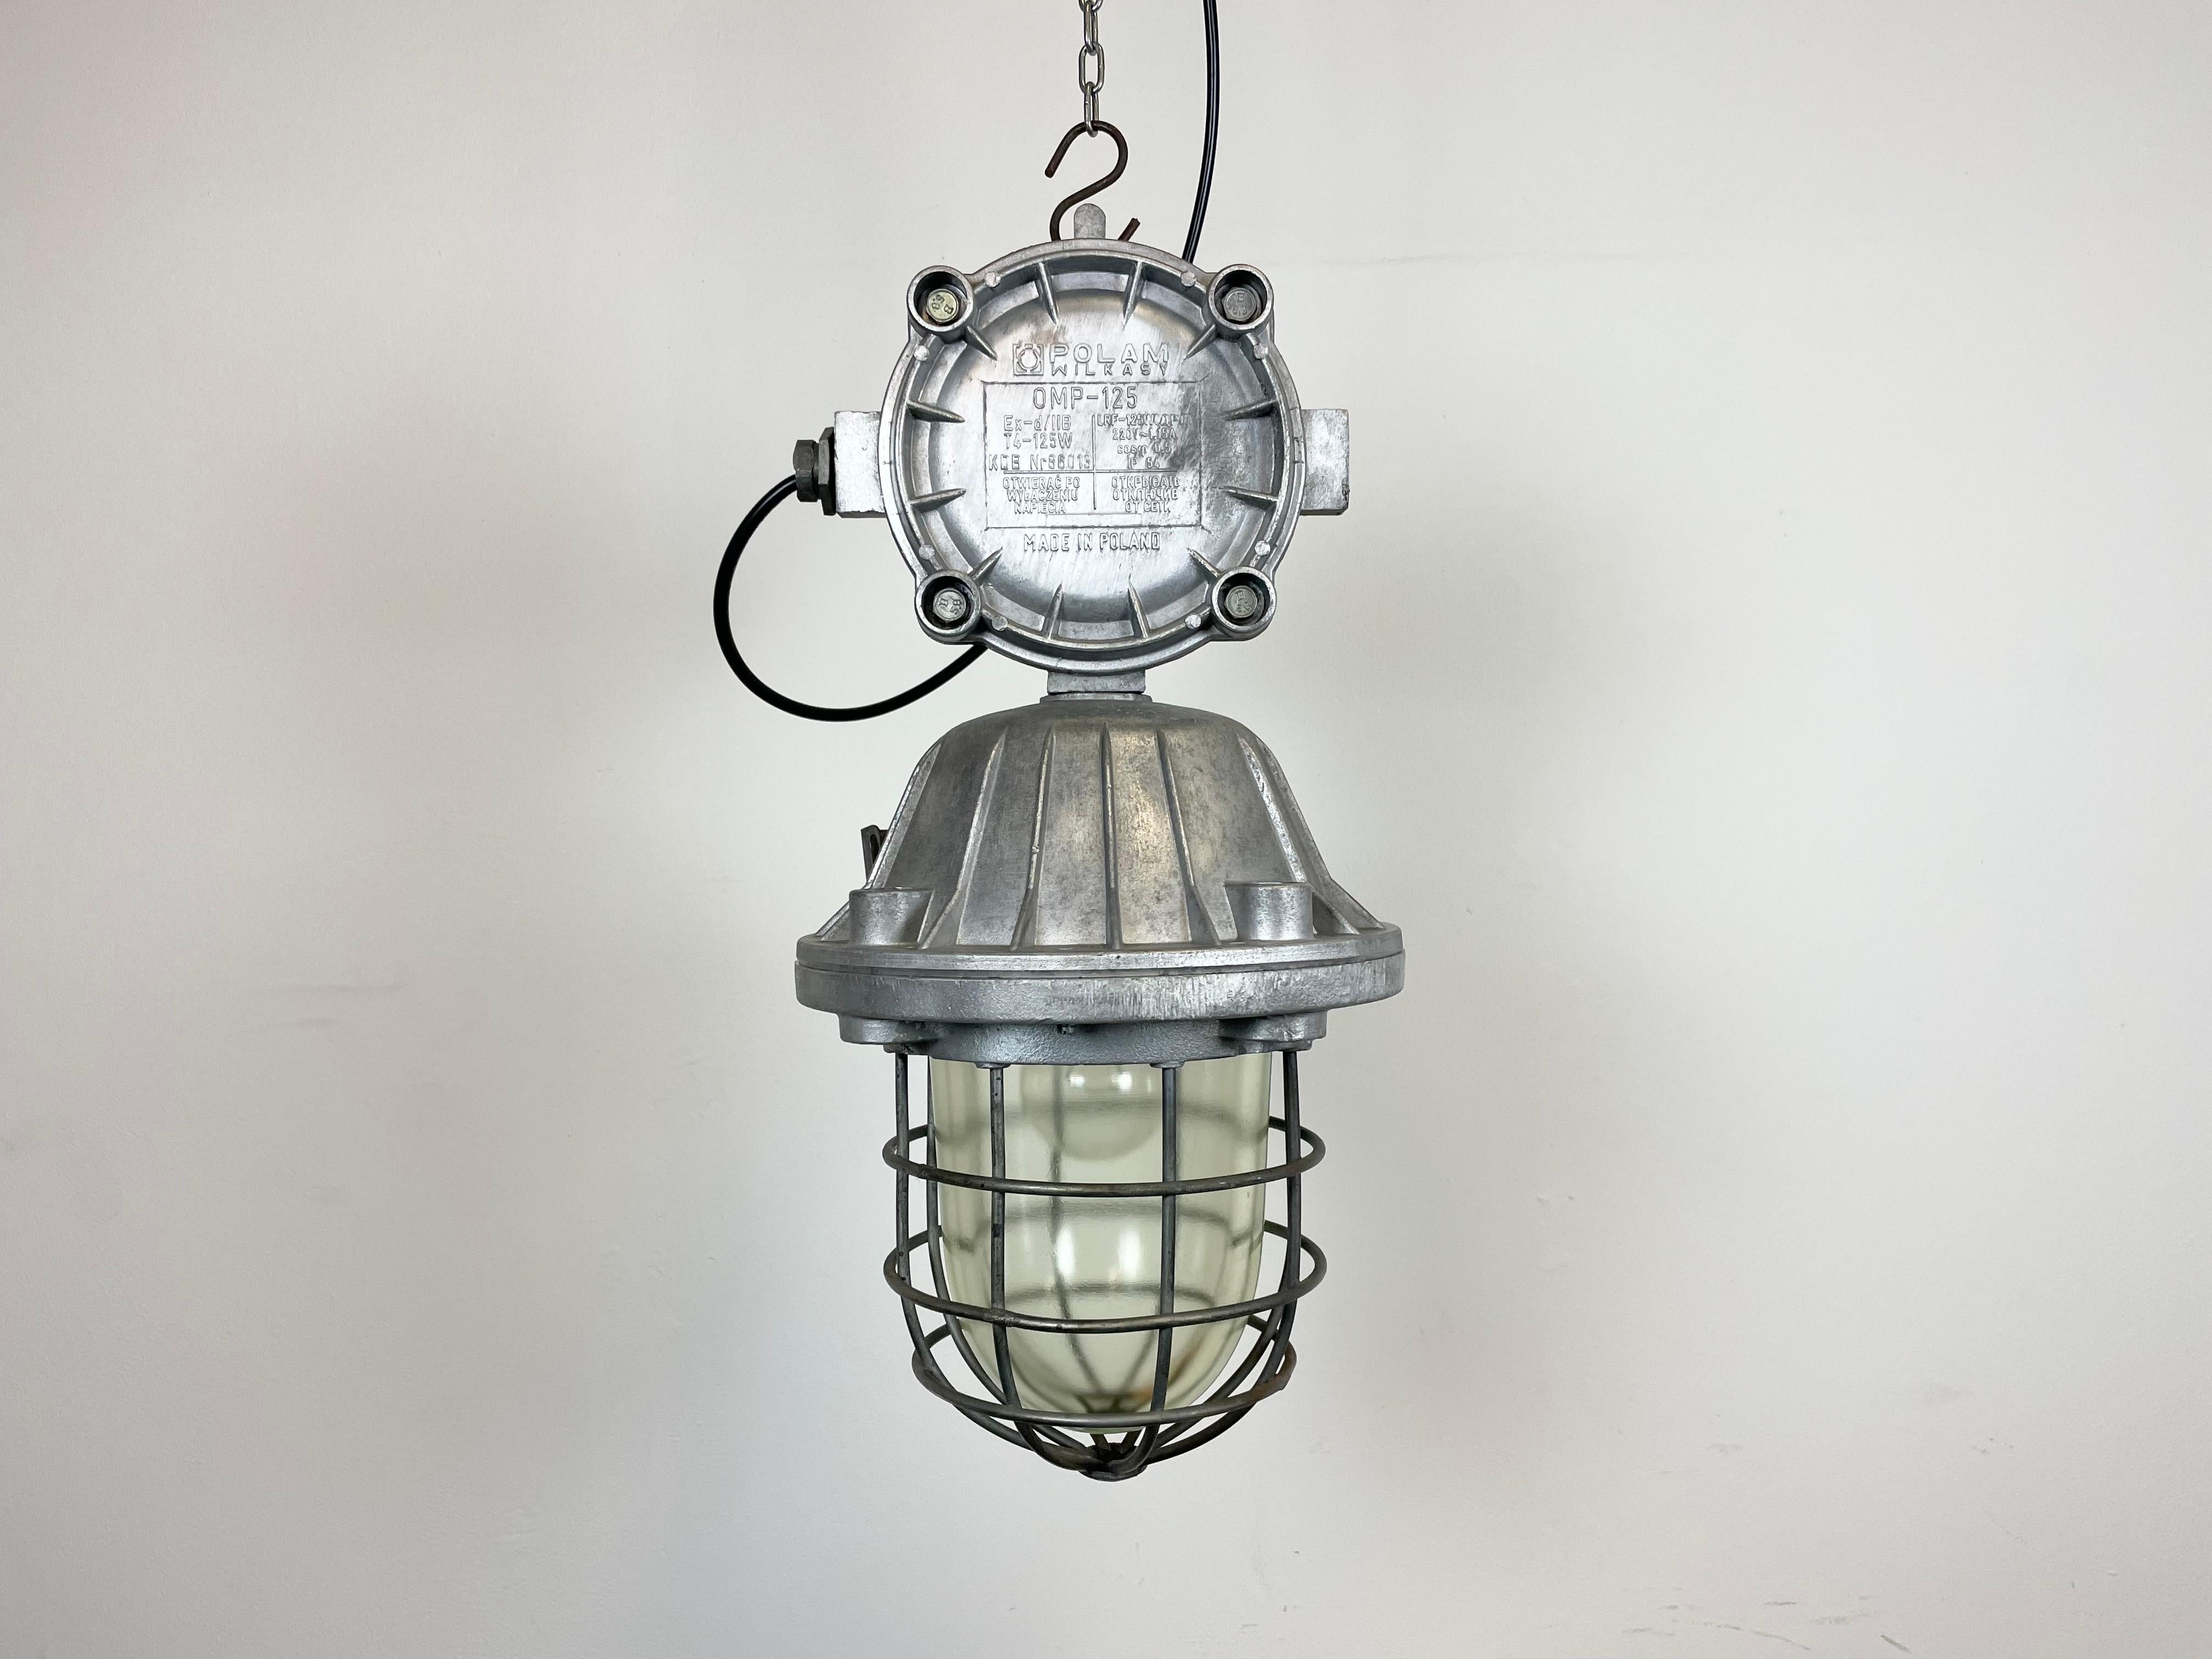 Large industrial factory hanging lamp made by Polam Wilkasy in Poland during the 1970s. It features a cast aluminium body, a clear glass cover and iron grid. The porcelain socket requires E 27 lightbulbs. New wire. The weight of the lamp is 8 kg !!!!